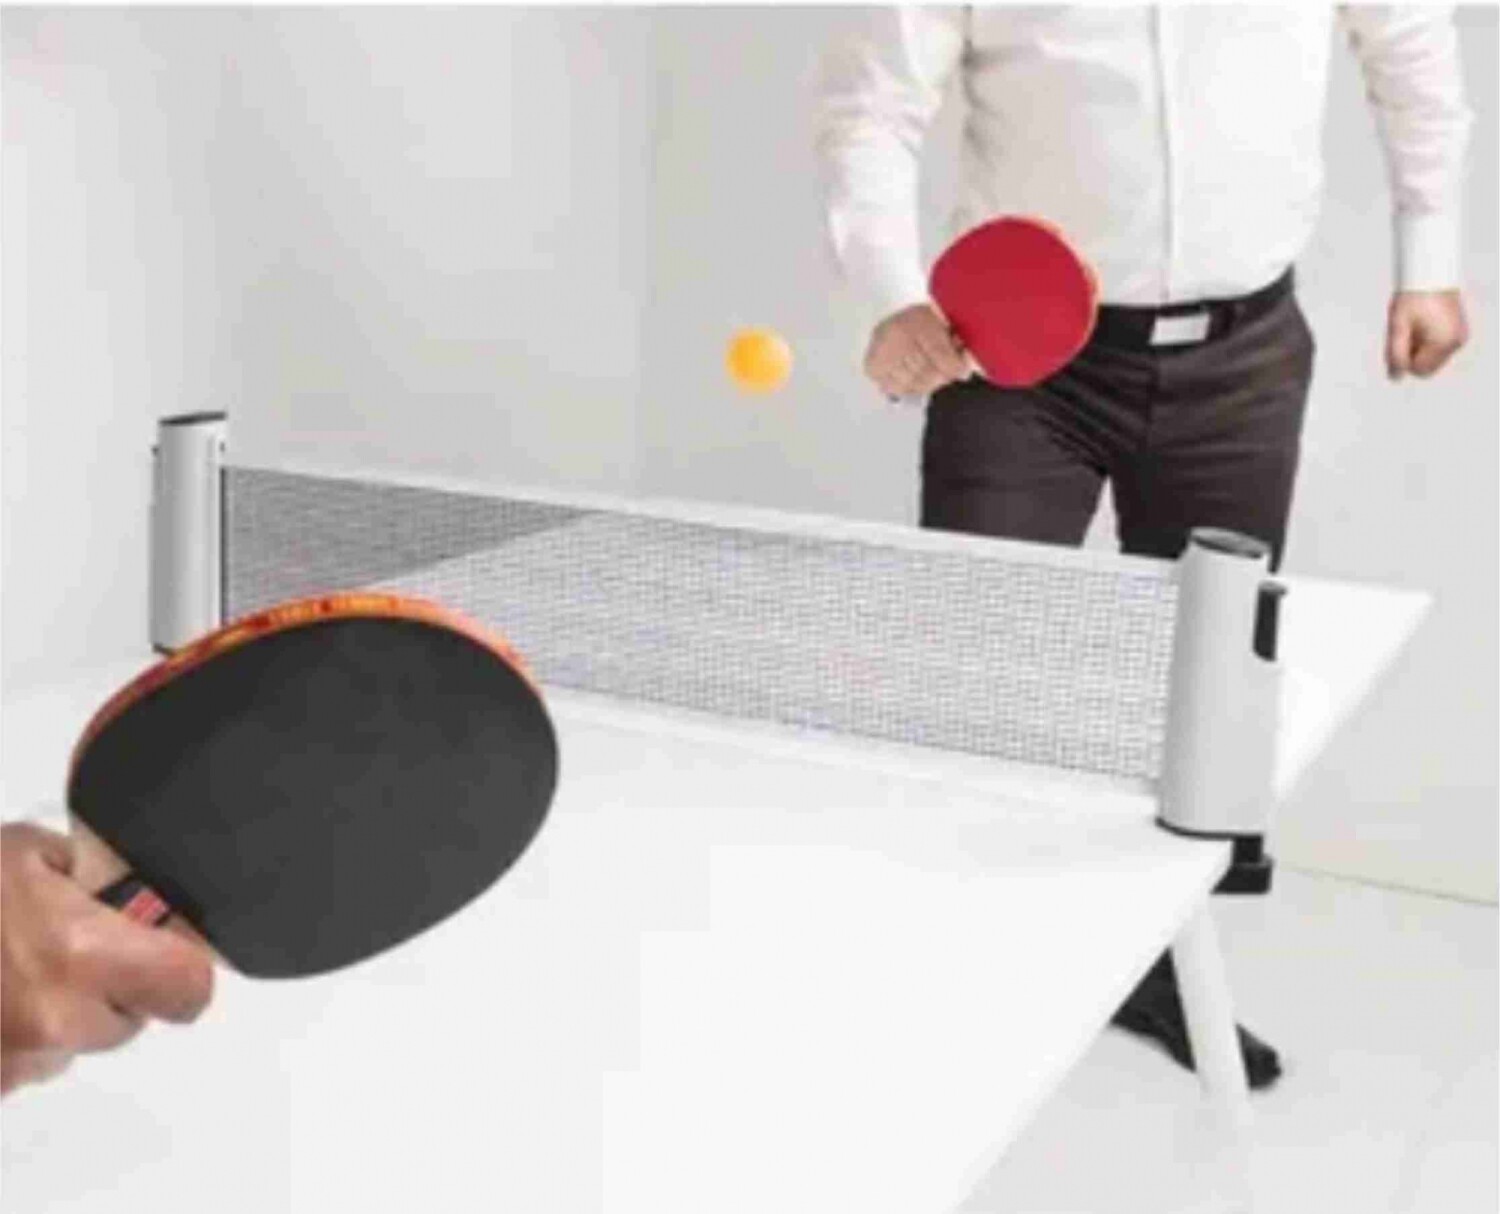 Soportes y Redes Ping Pong, Redes Mesas Ping Pong, Redes y postes